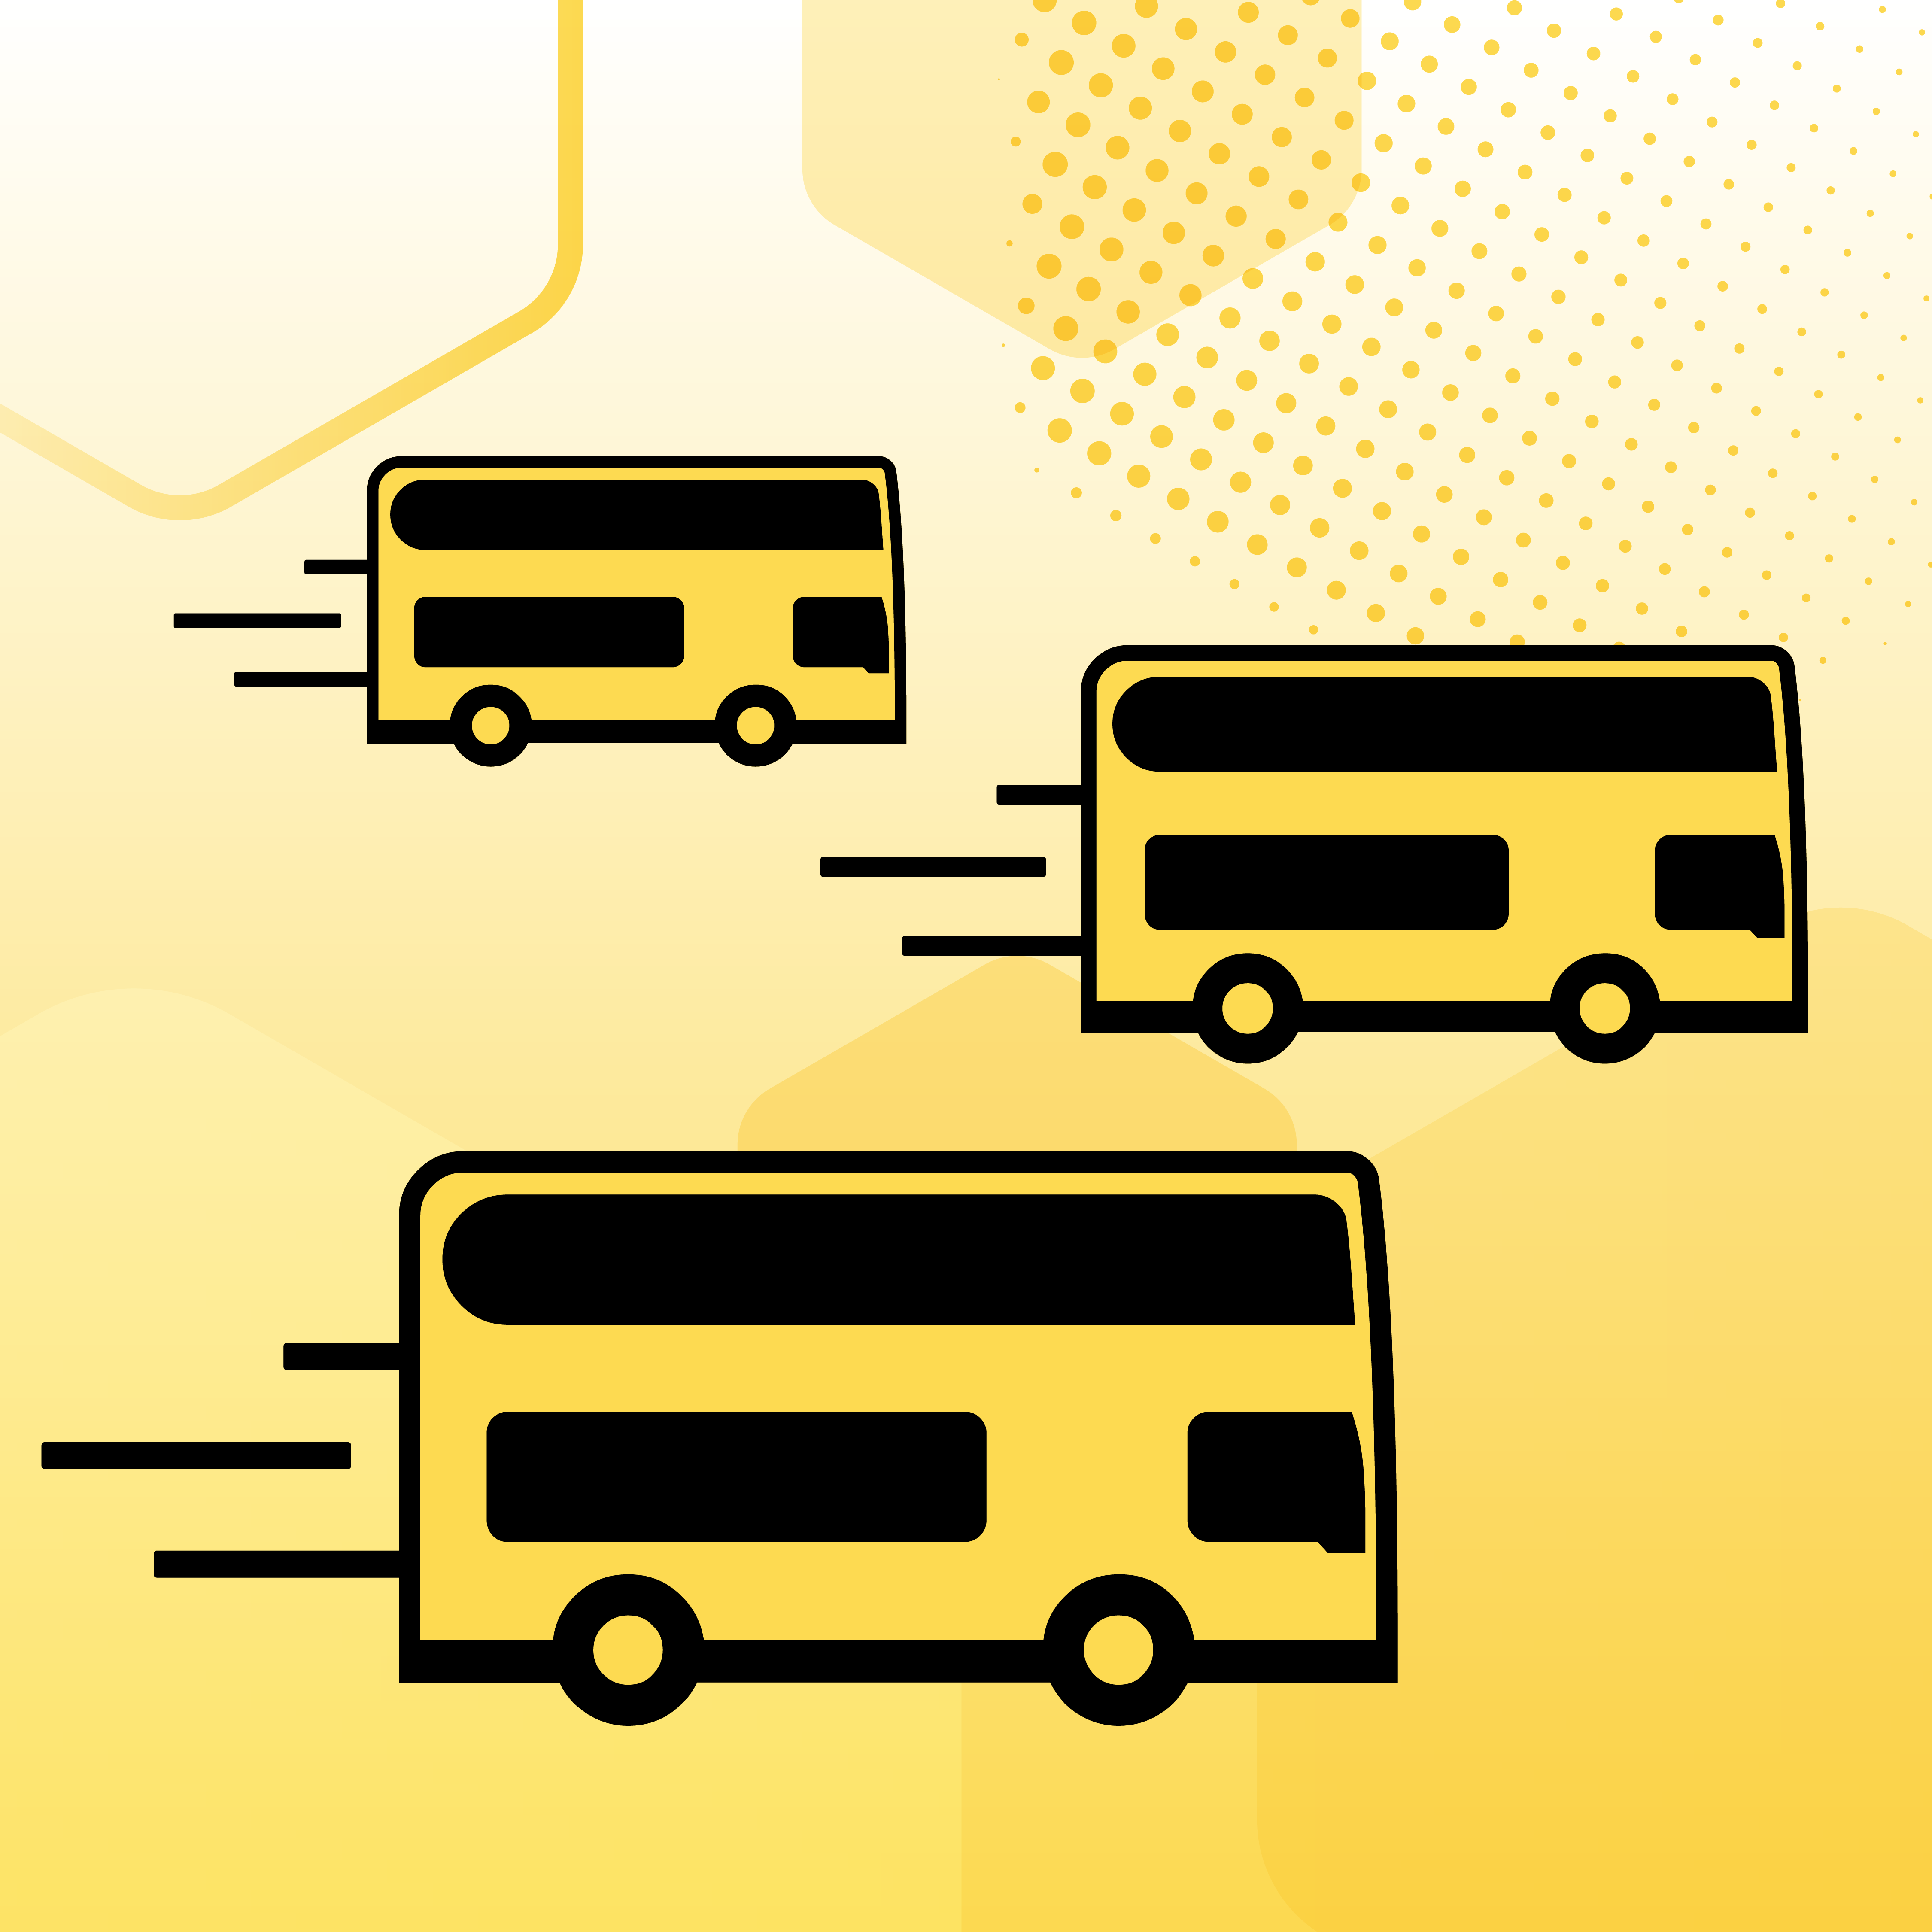 Bee Network yellow buses on a yellow background